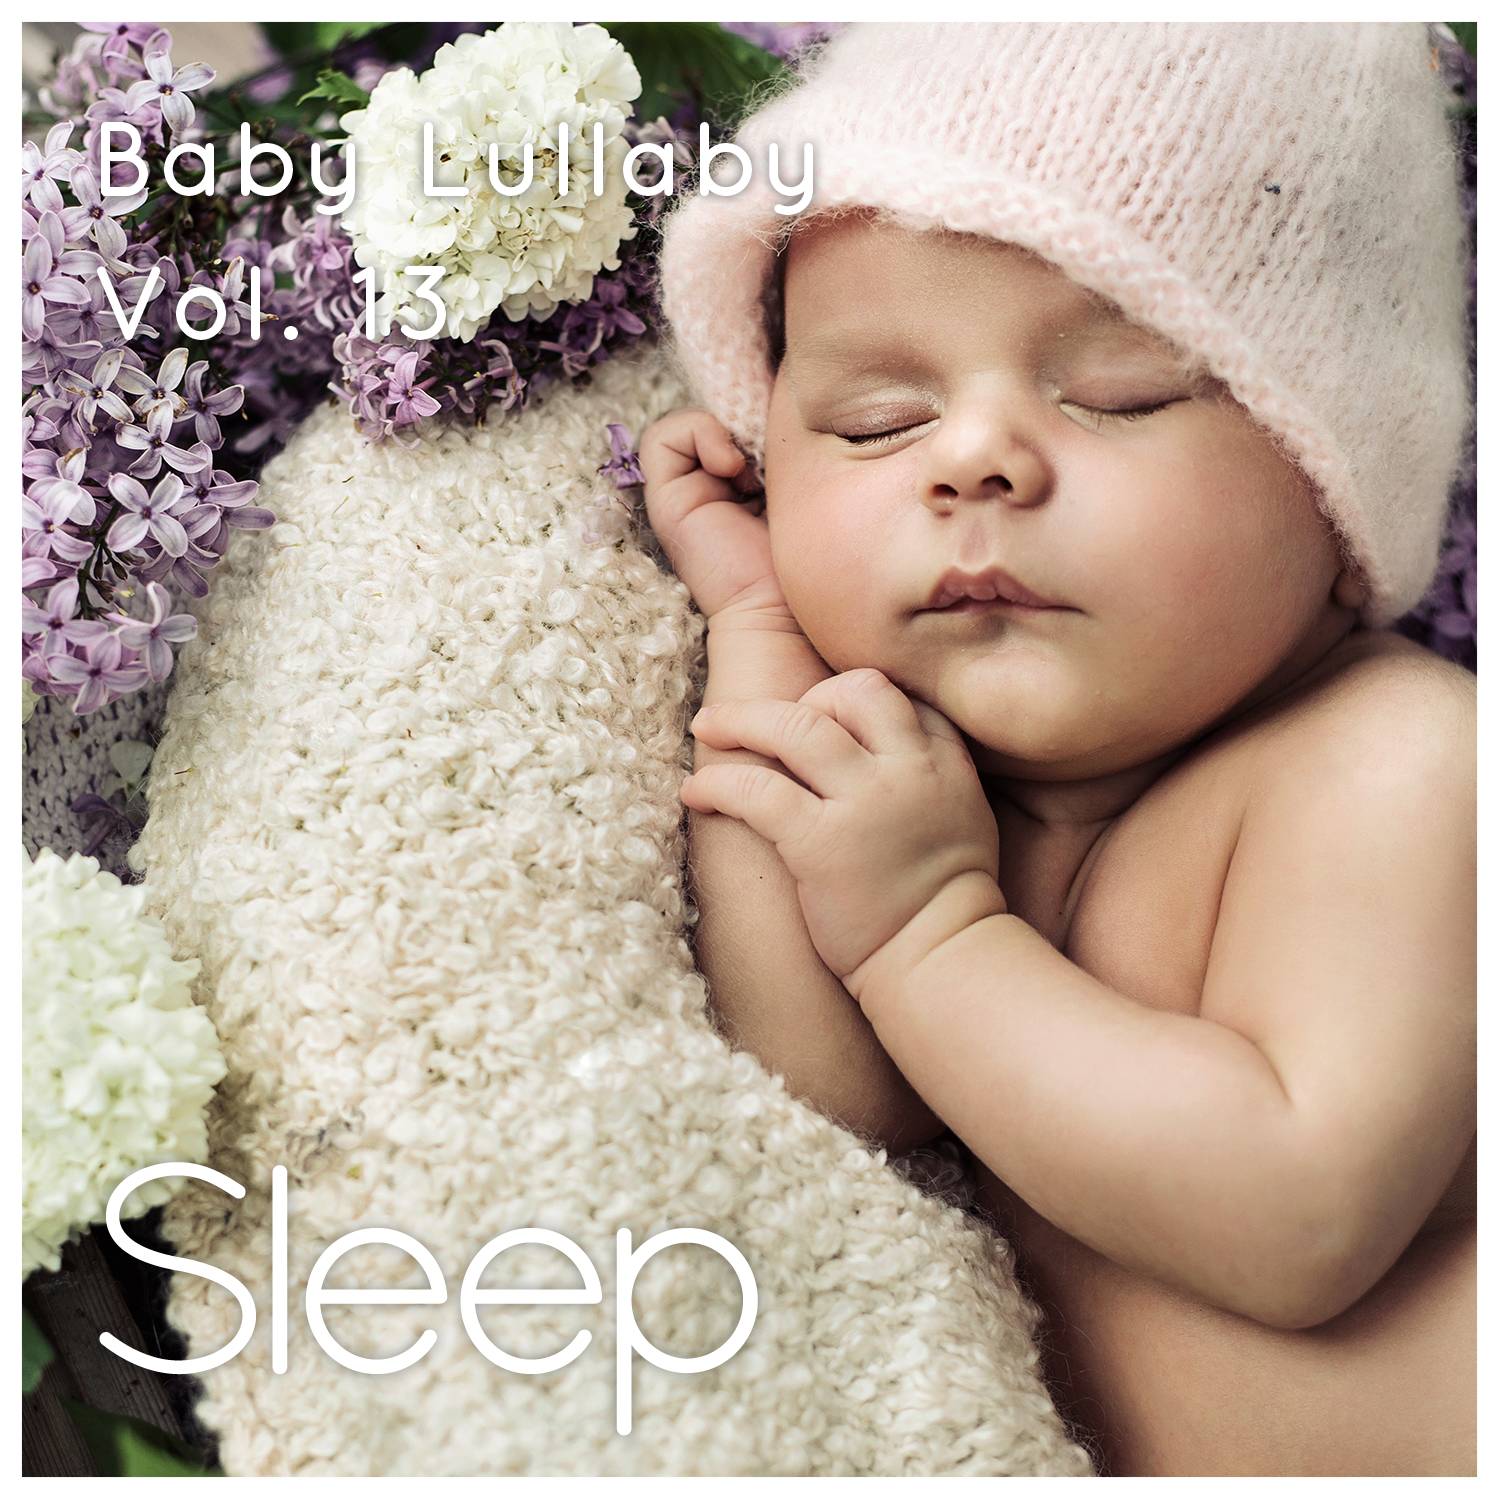 Baby Sleep Ambient Lullaby, Pt. 63